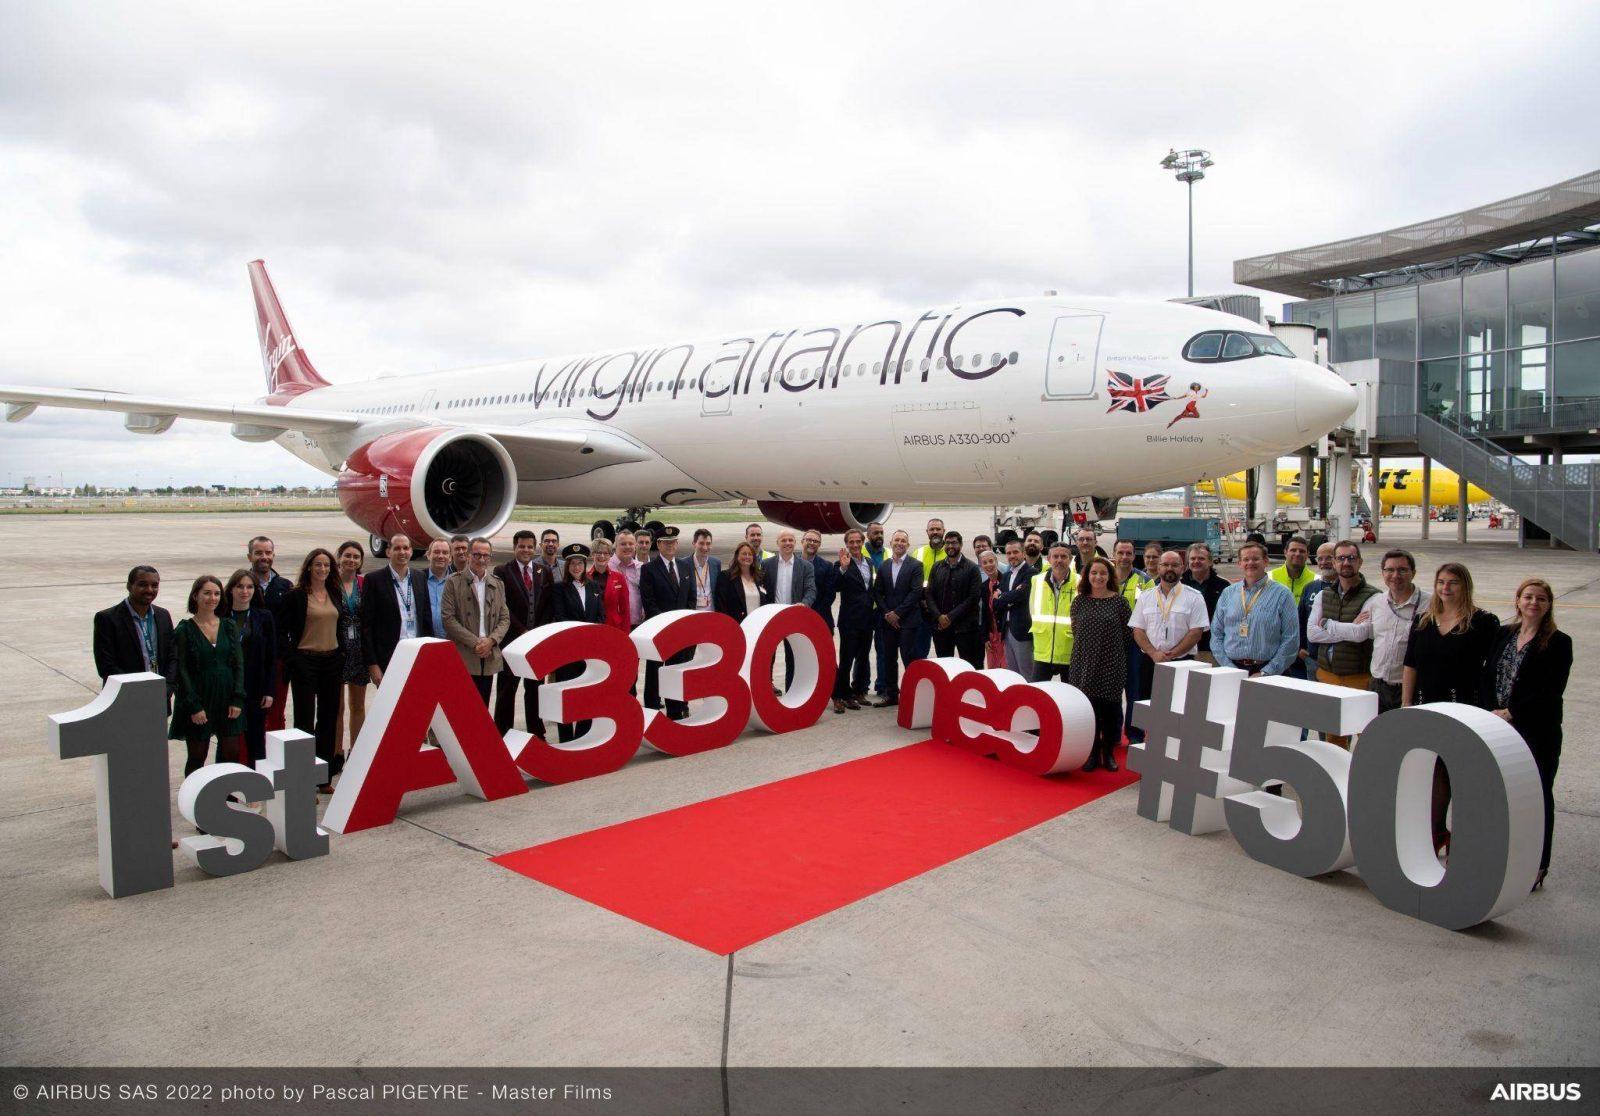 Virgin Atlantic Takes Delivery of its First A330neo